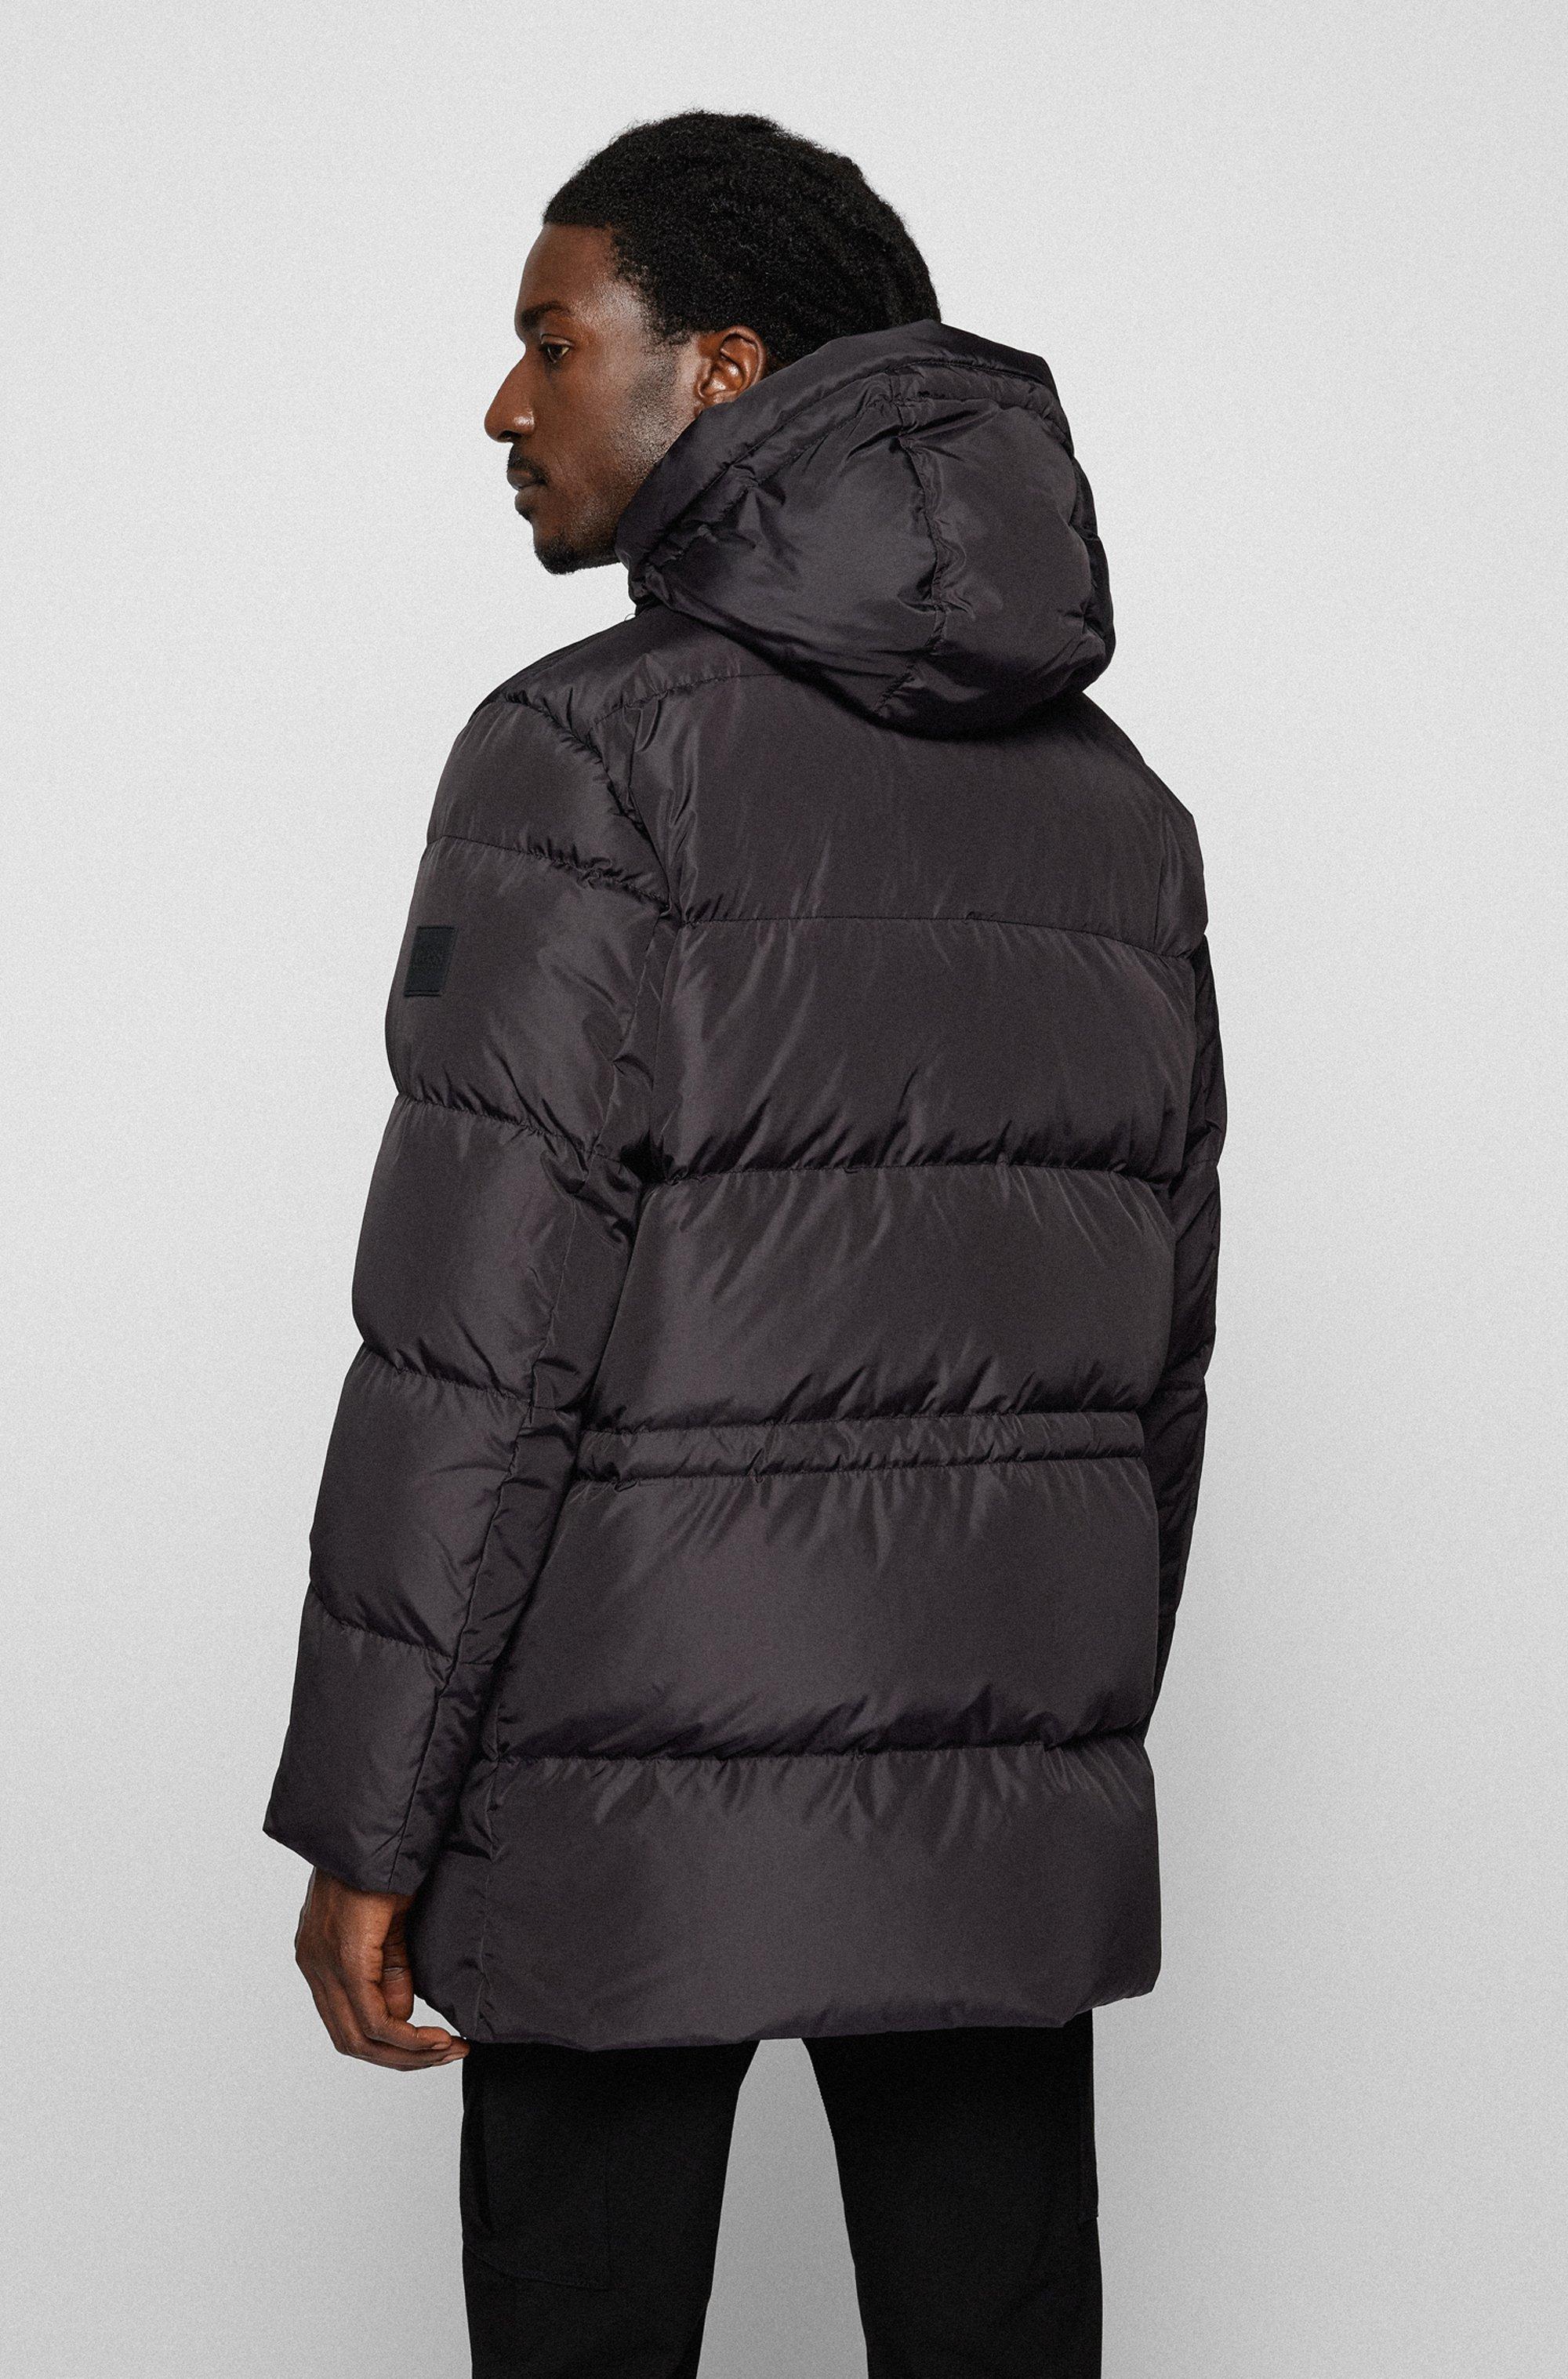 BOSS by HUGO BOSS Down-filled Parka Jacket With Water-repellent Finish in  Black for Men | Lyst